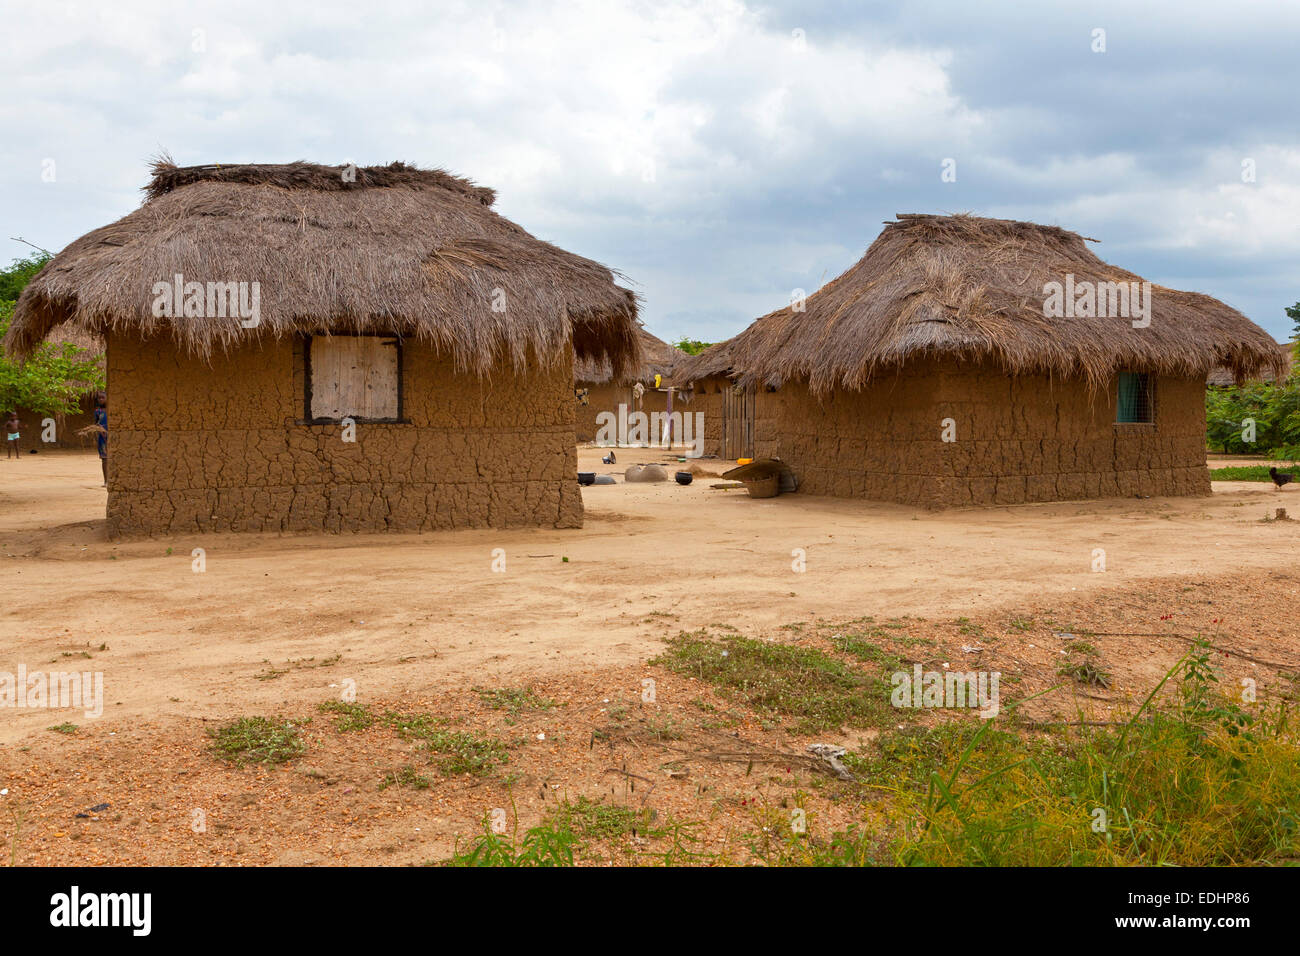 Thatched houses, Ada, Greater Accra, Ghana, Africa Stock Photo